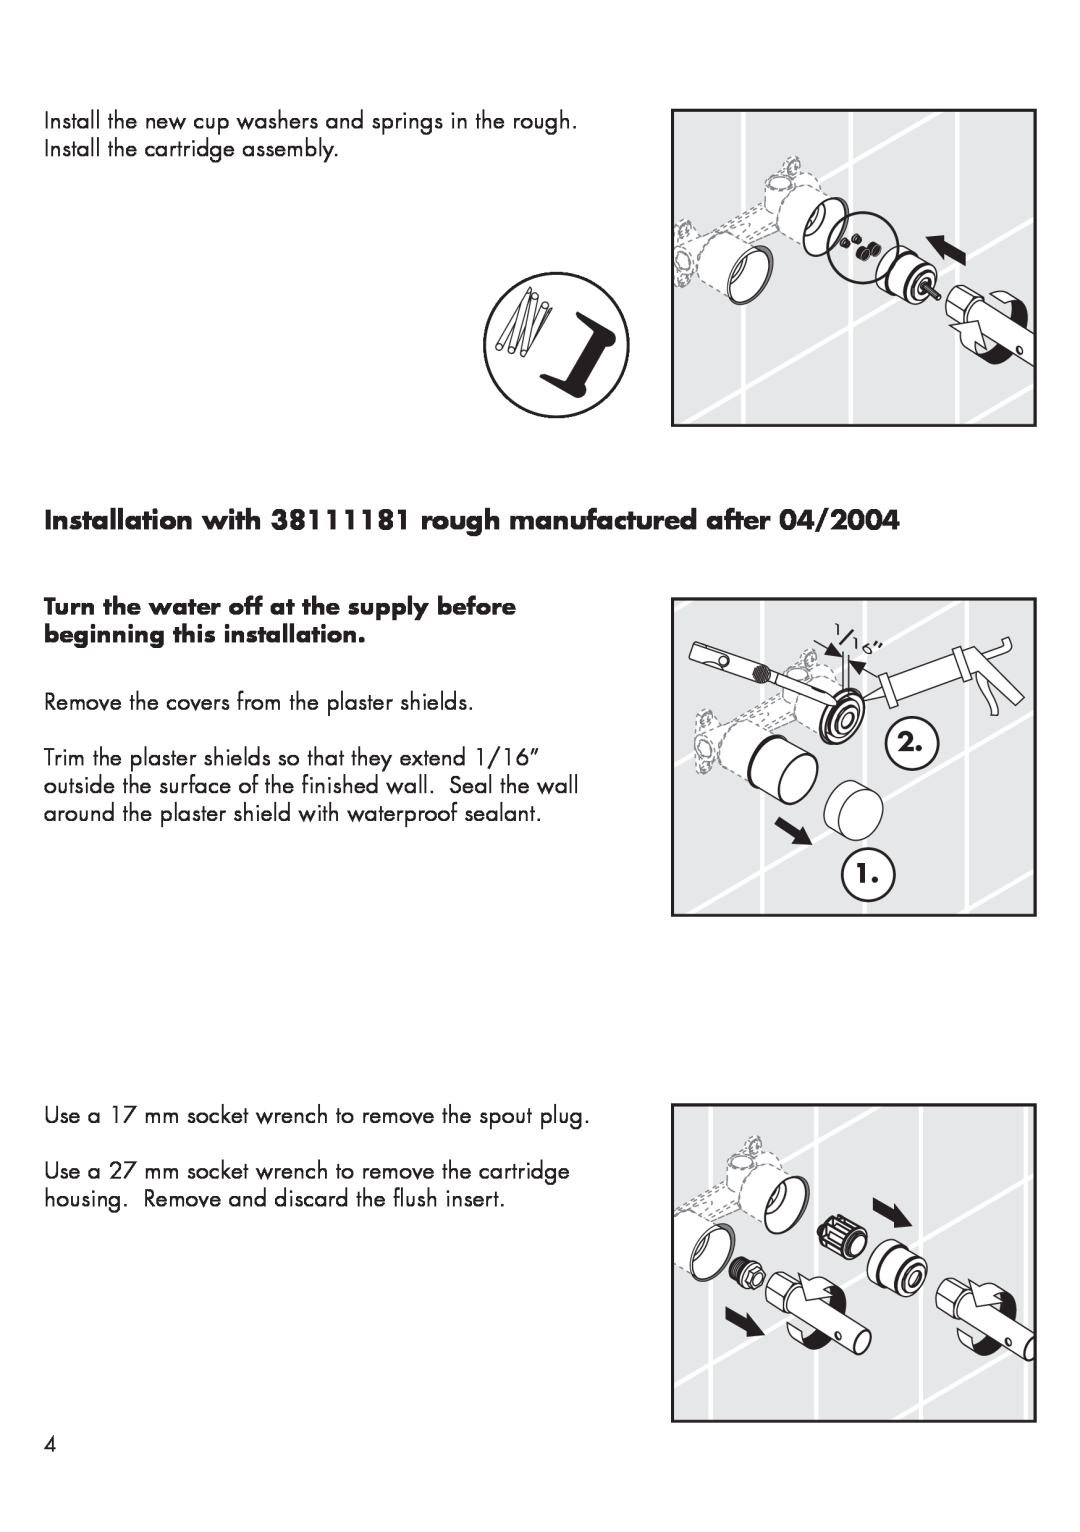 Hans Grohe 38117XX1, 38118XX1 Install the cartridge assembly, Remove the covers from the plaster shields 